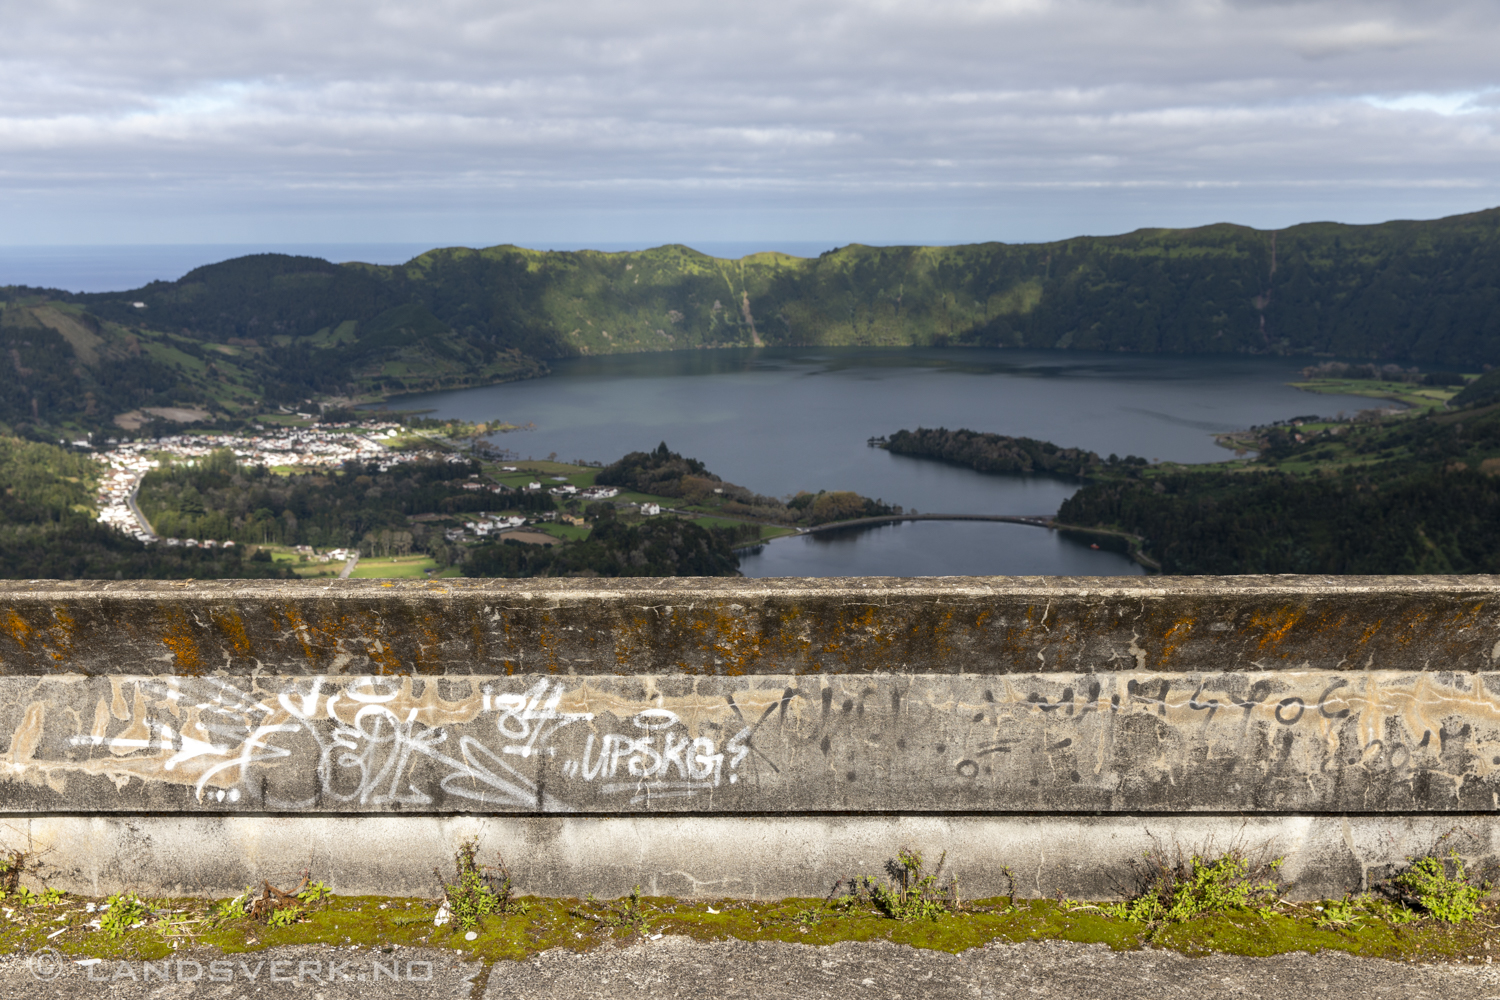 On top of the Monte Palace Hotel Ruins. São Miguel, Azores. (Canon EOS 5D Mark IV / Canon EF 24-70mm f/2.8 L II USM)